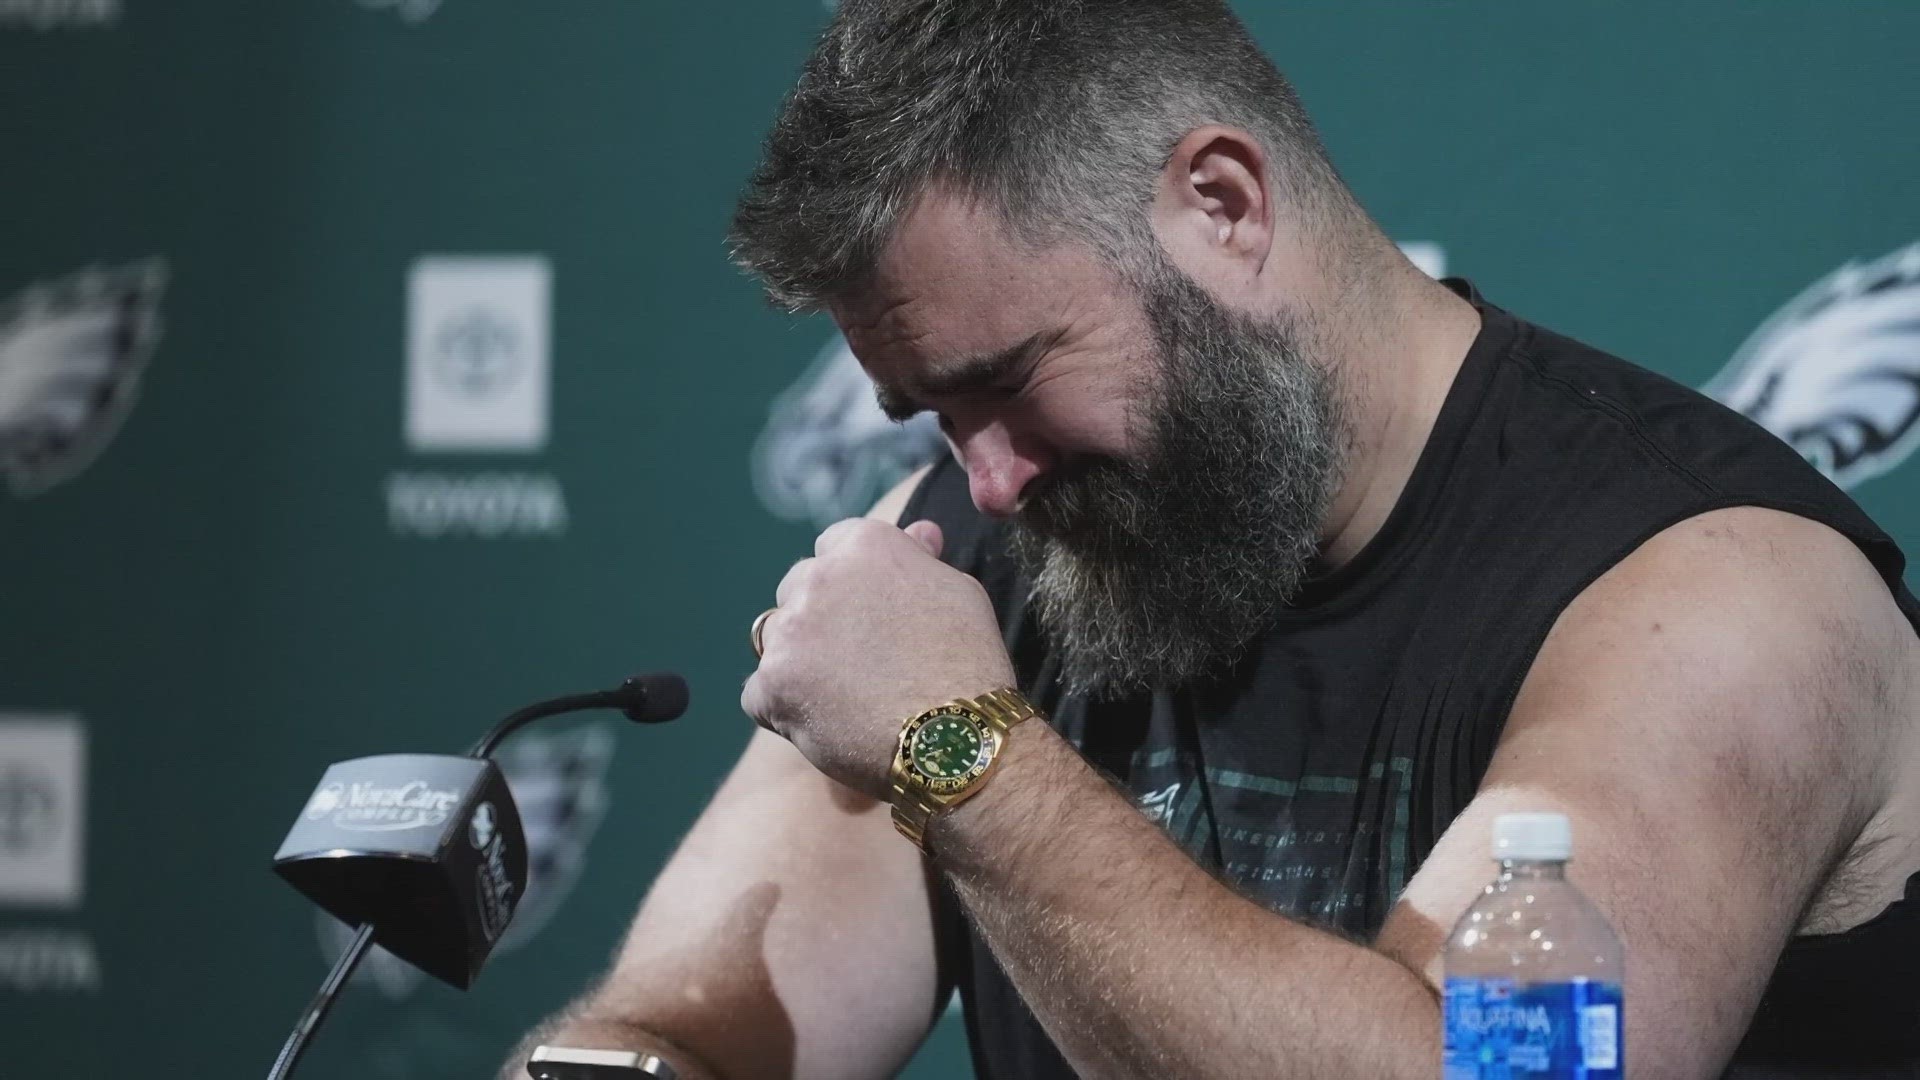 The Super Bowl champ tearfully spoke about retirement during a Monday press conference. Kelce talked about his love for the sport as he wraps up his 13-year career.